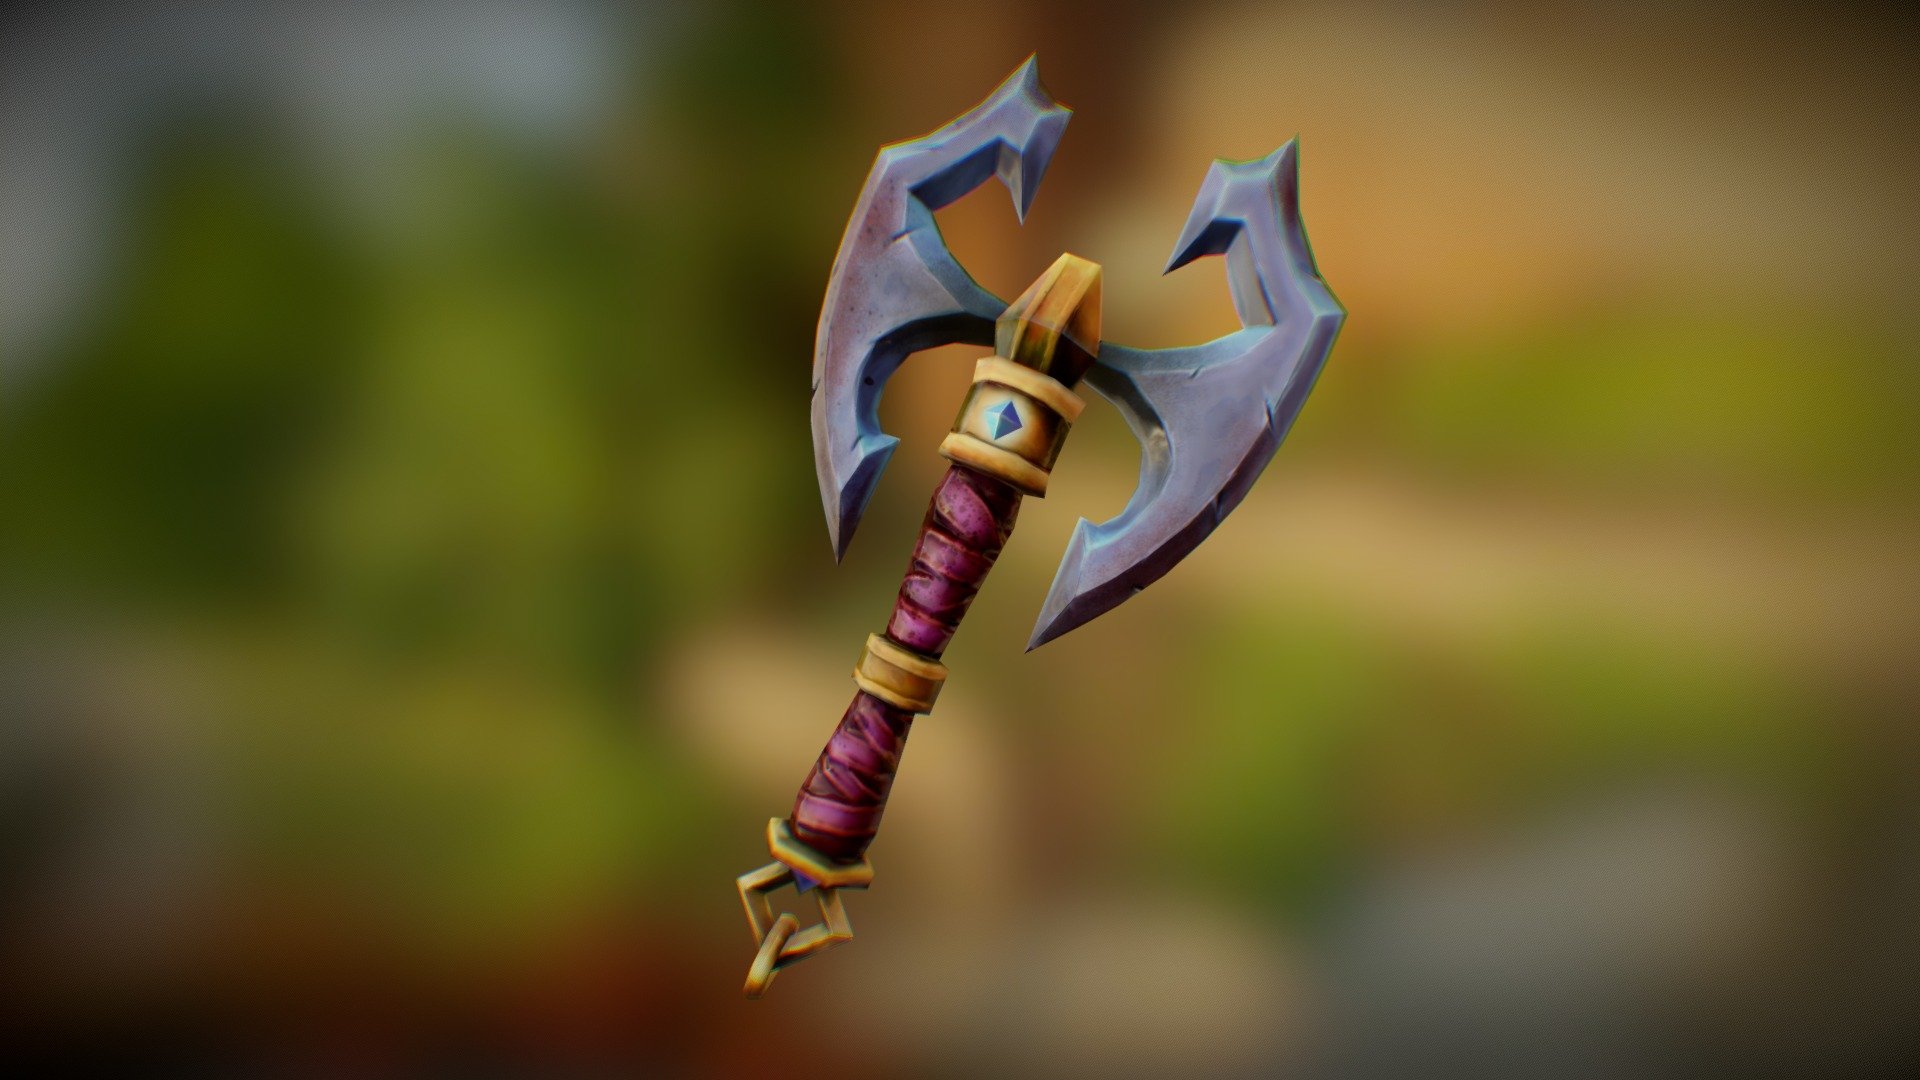 This is a weapon I created to practice my hand painting and sculpting skills. It's low poly to be game ready 3d model